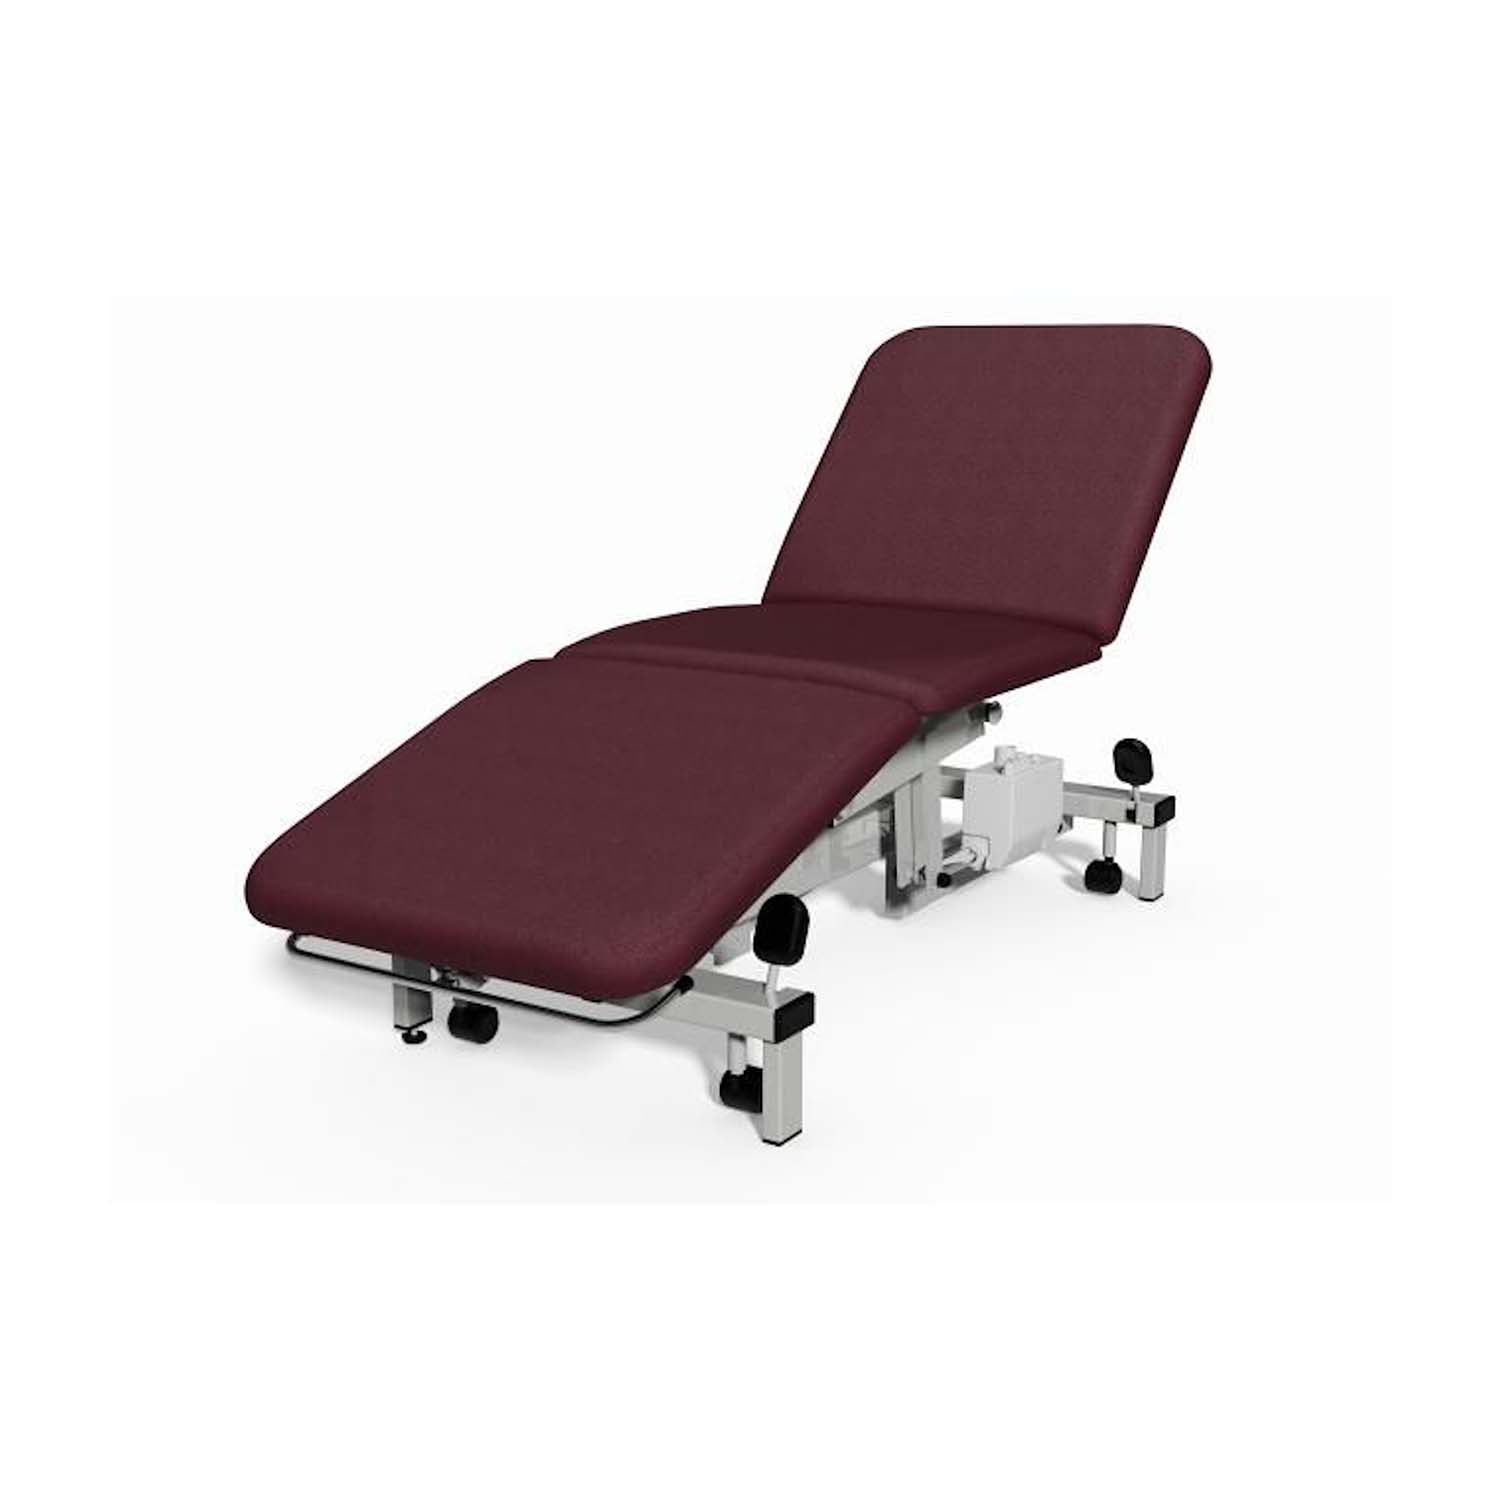 Plinth 2000 Model 503 3 Section Examination Couch | Hydraulic | Mulled Wine